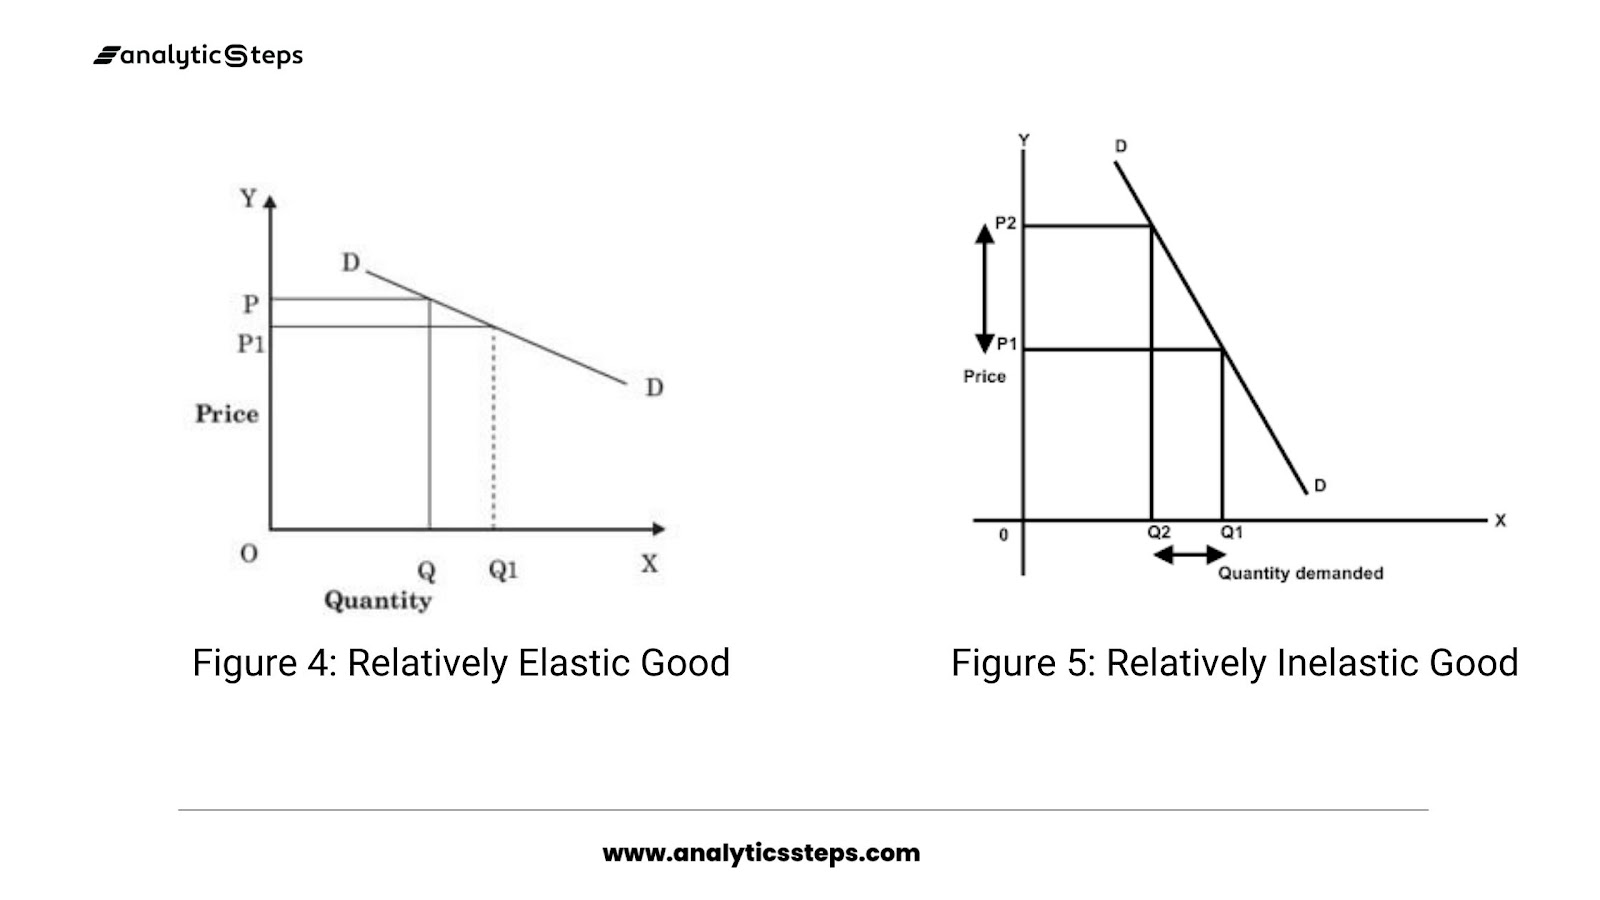 The image shows the demand curves for relatively elastic demand and relatively inelastic demand.